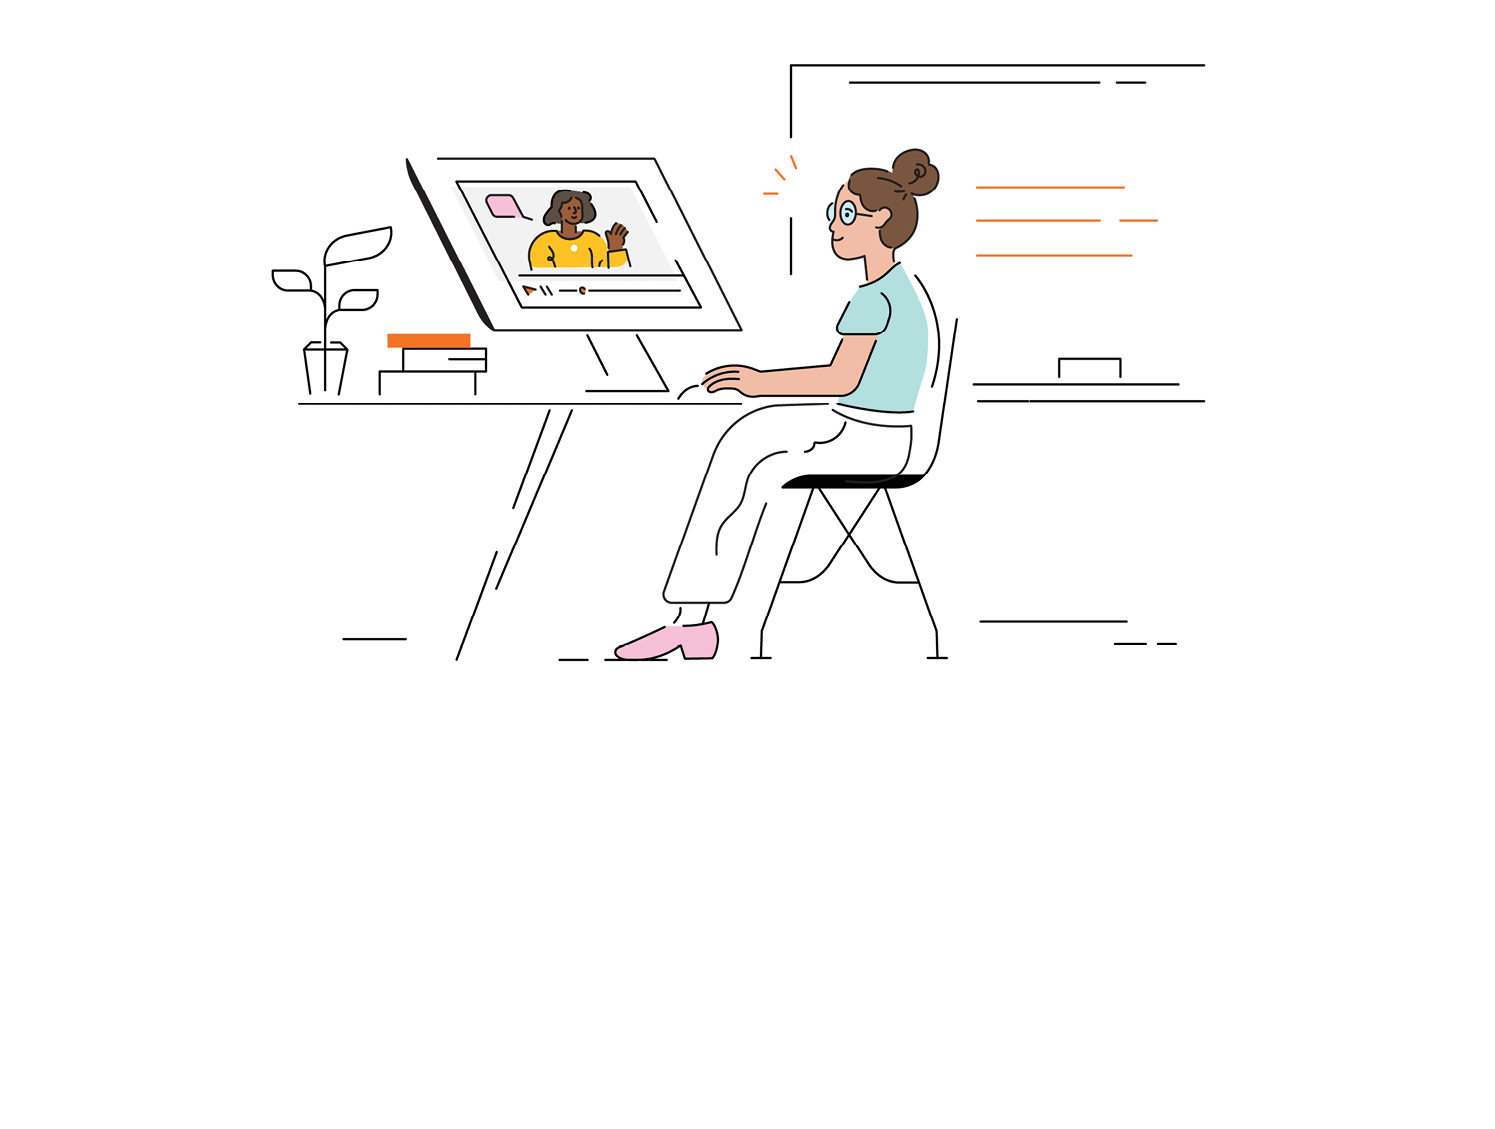 A woman sitting at a desk, working on a computer with an image of a family displayed on the screen, in a minimalist style office, exploring ſֱ Science success stories.